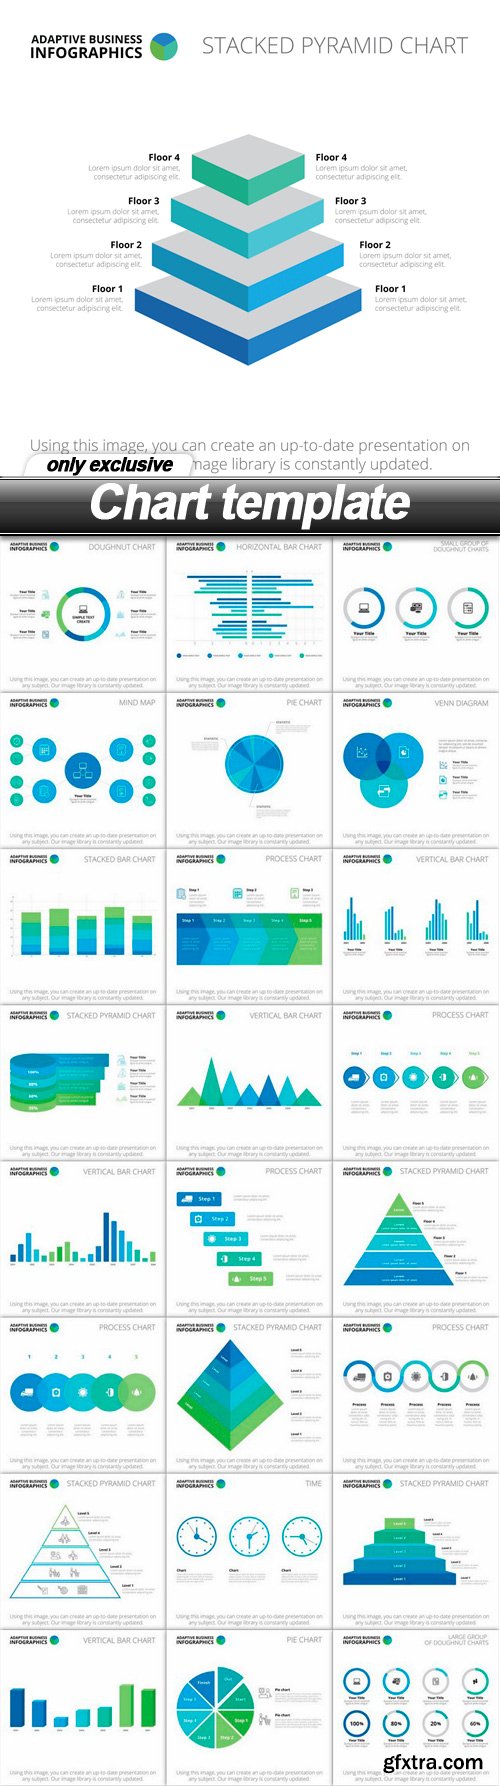 Chart template - 25 EPS